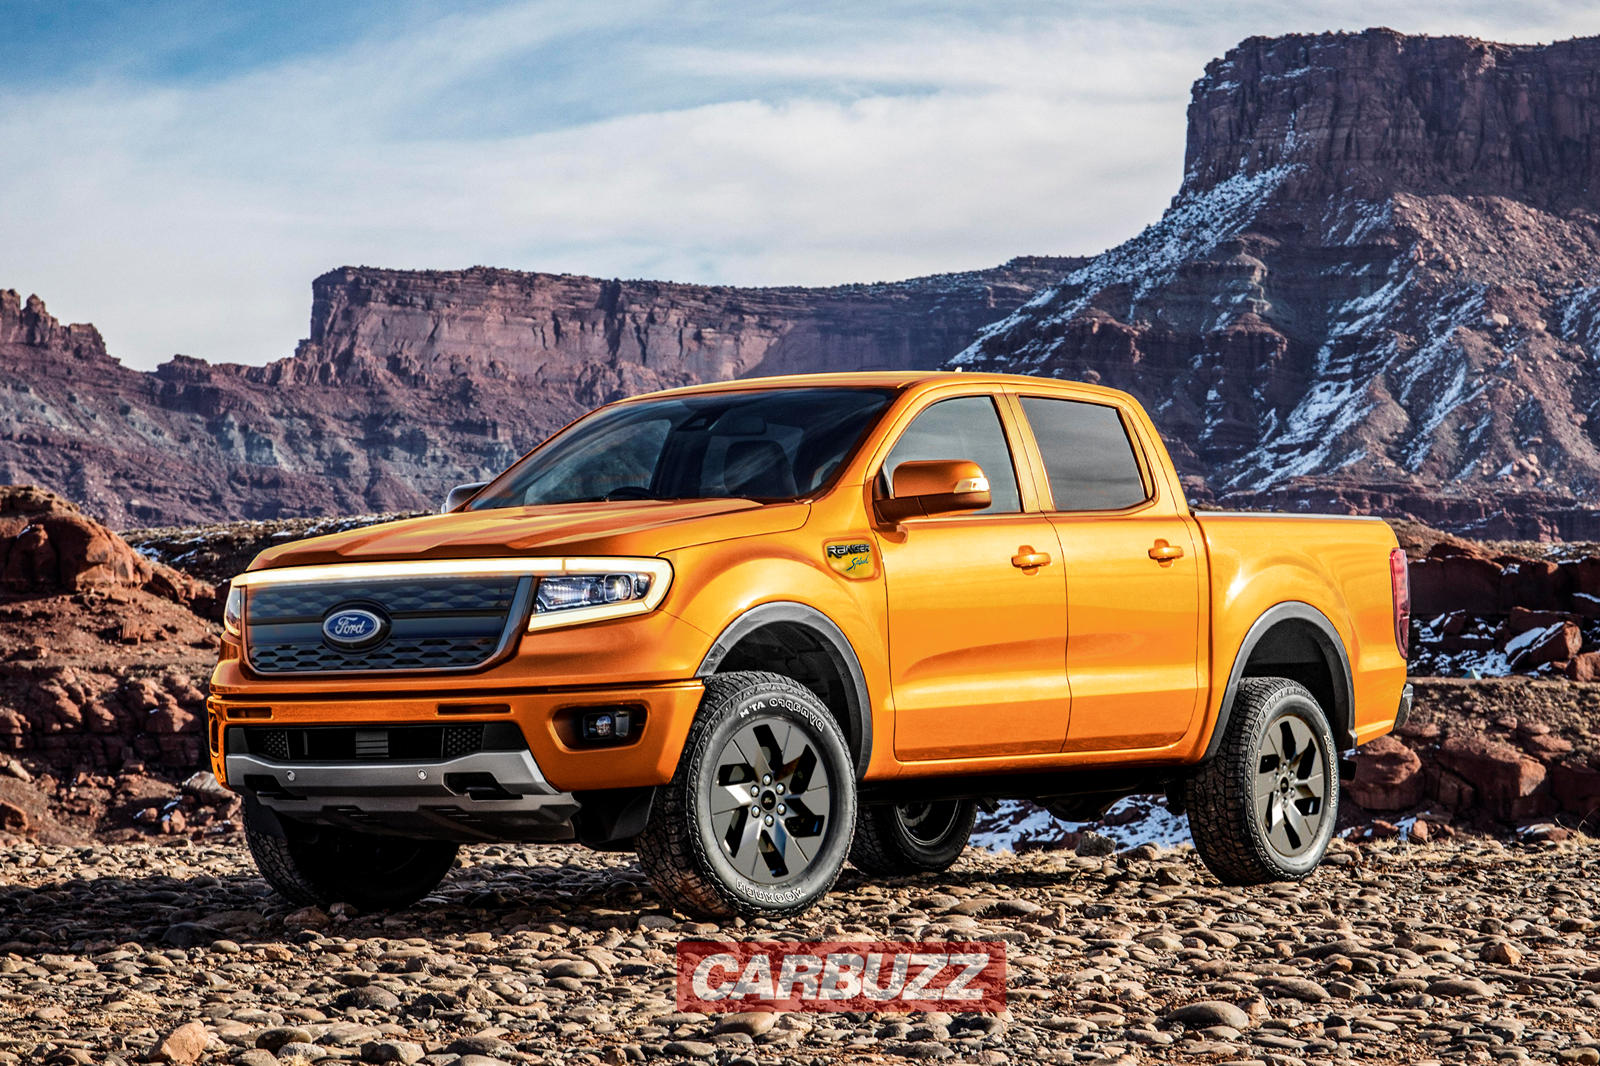 Ford Ranger Splash To Be Revived As Electric Truck CarBuzz